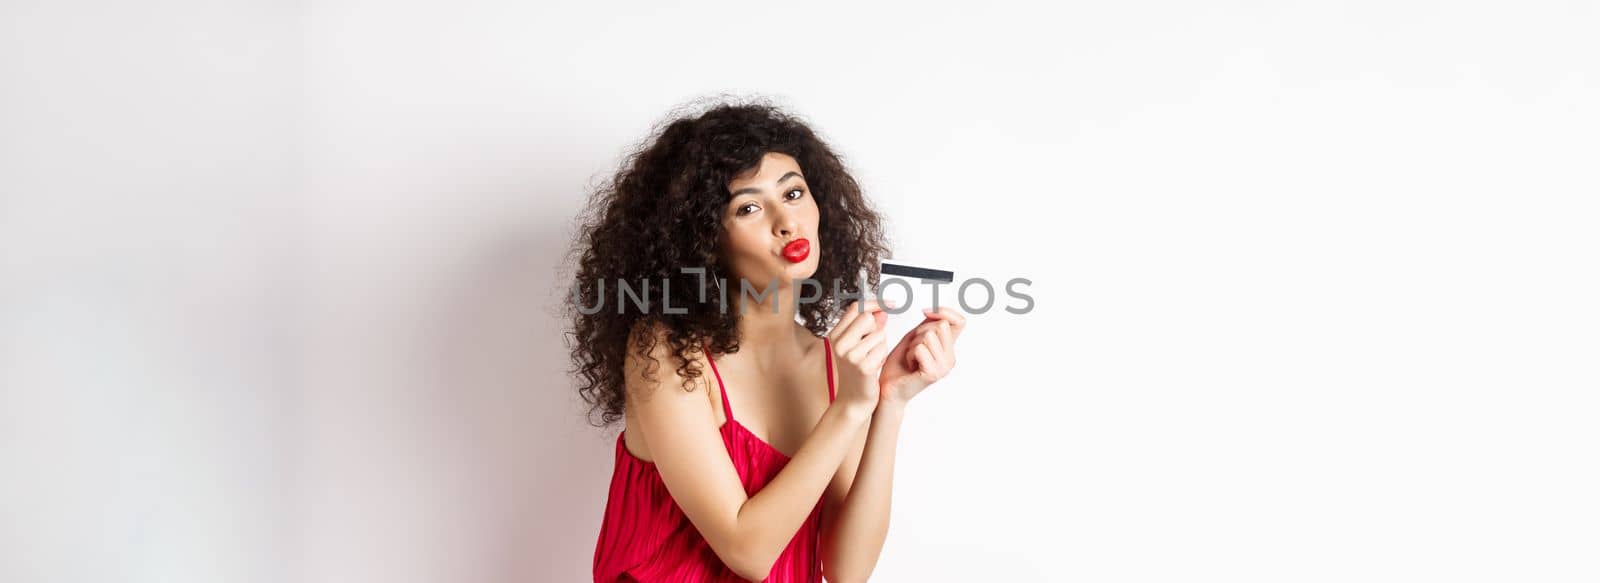 Shopping. Beautiful lady with curly hair, pucker lips, kissing plastic credit card, standing in red dress against white background.